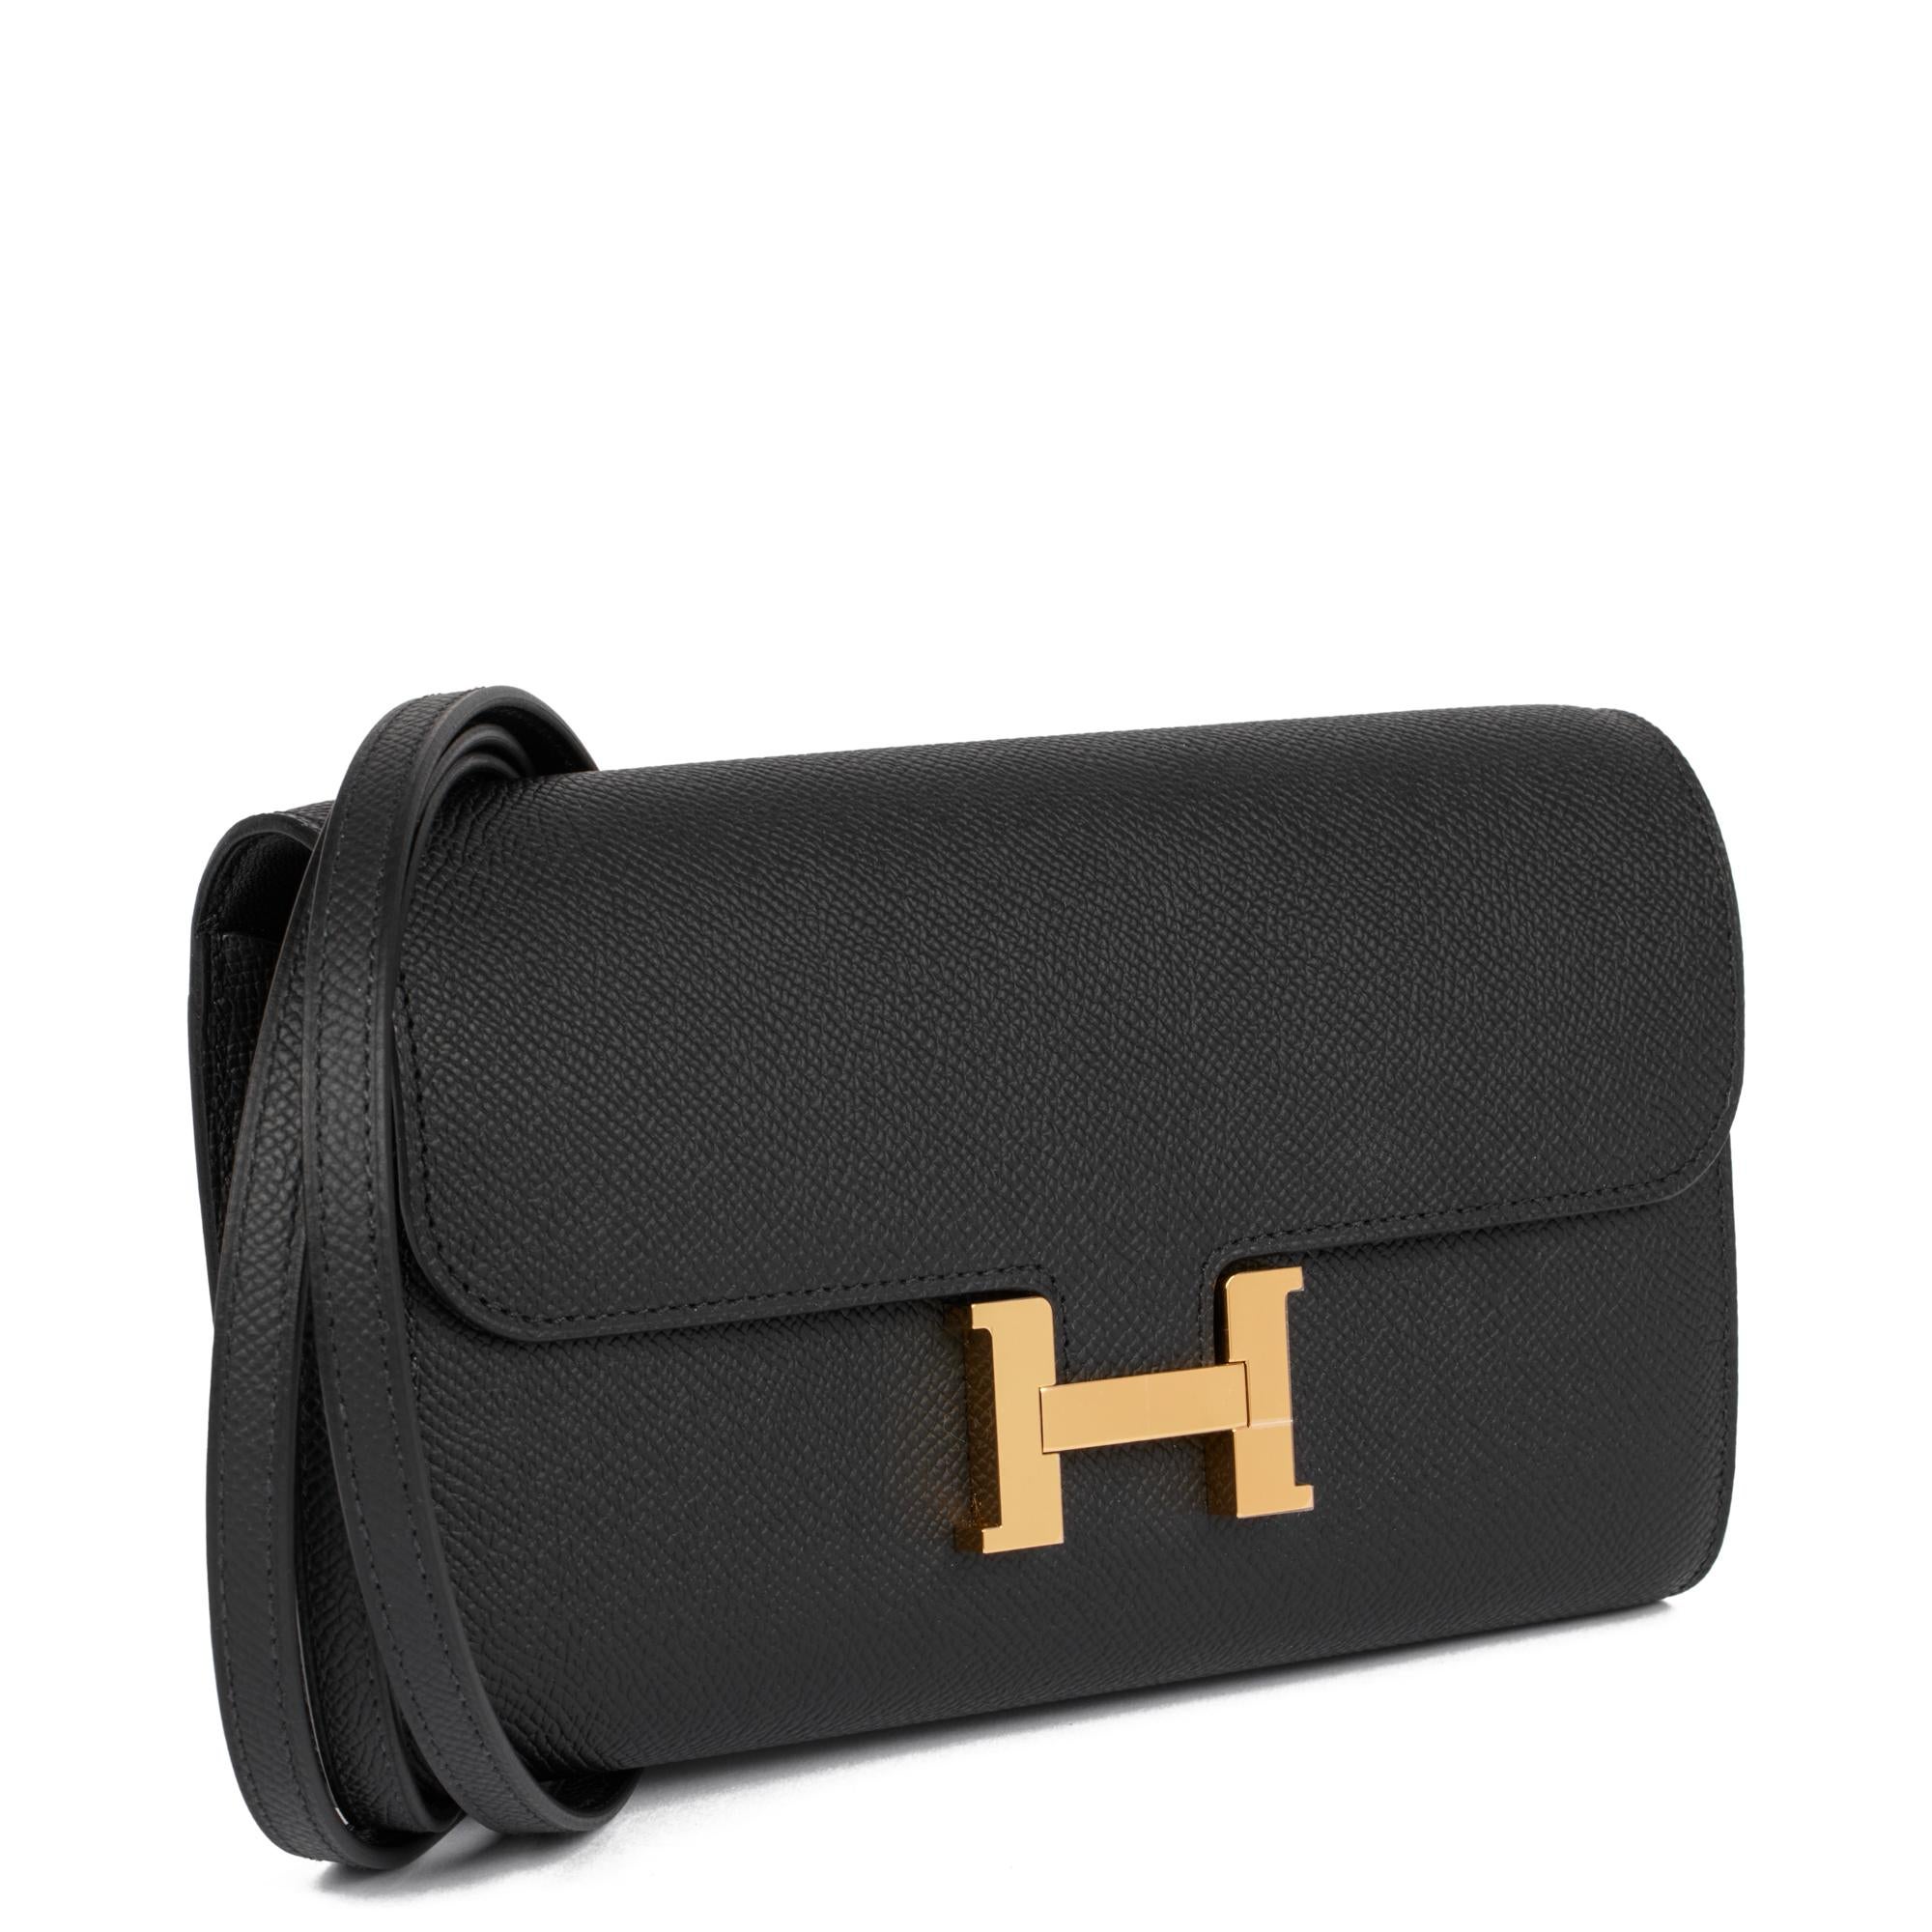 HERMÈS
Black Epsom Leather Constance To Go Long Wallet

Xupes Reference: HB5201
Serial Number: U
Age (Circa): 2022
Accompanied By: Hermès Box, Care Booklet, Protective Felt, Shoulder Strap, Receipt
Authenticity Details: Date Stamp (Made in